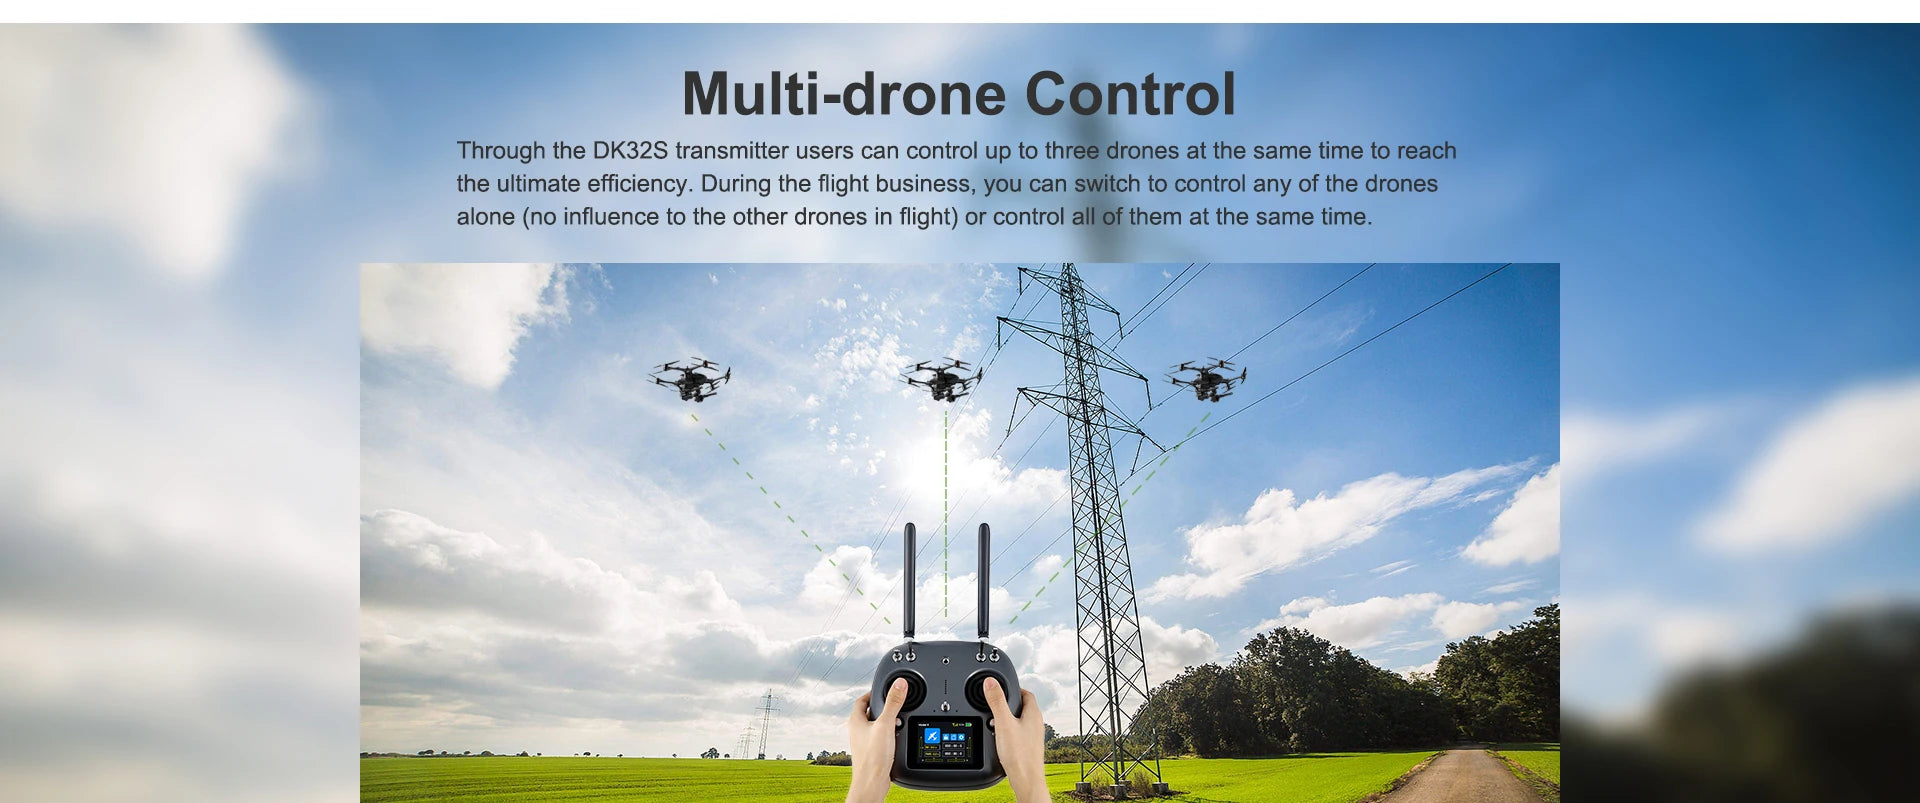 users can control up to three drones at the same time to reach the ultimate efficiency .